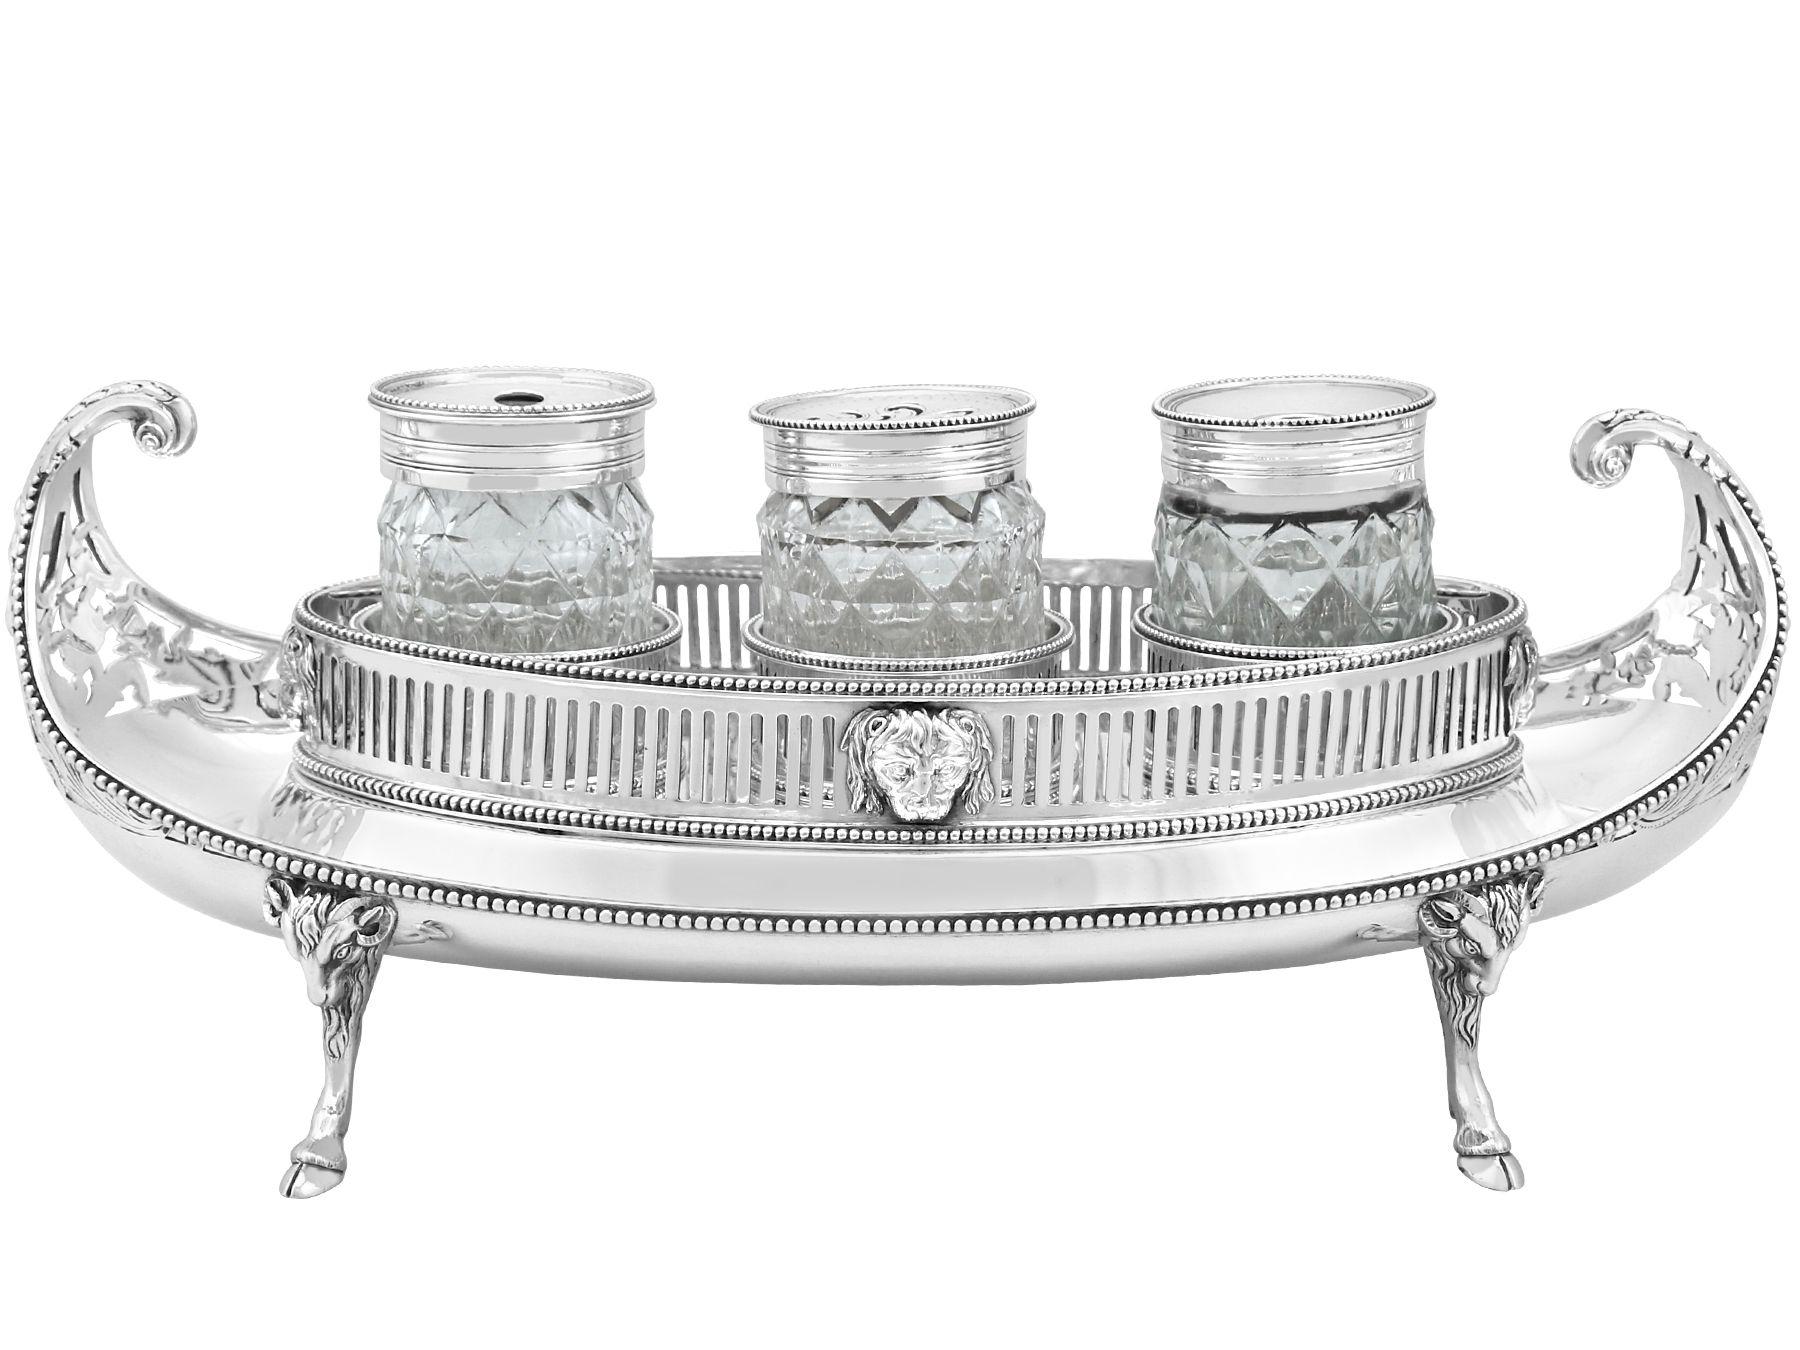 A magnificent, fine and impressive antique George III sterling silver and glass ladies inkstand; an addition to our ornamental Georgian silverware collection.

This magnificent antique George III sterling silver desk standish has a boat-shaped